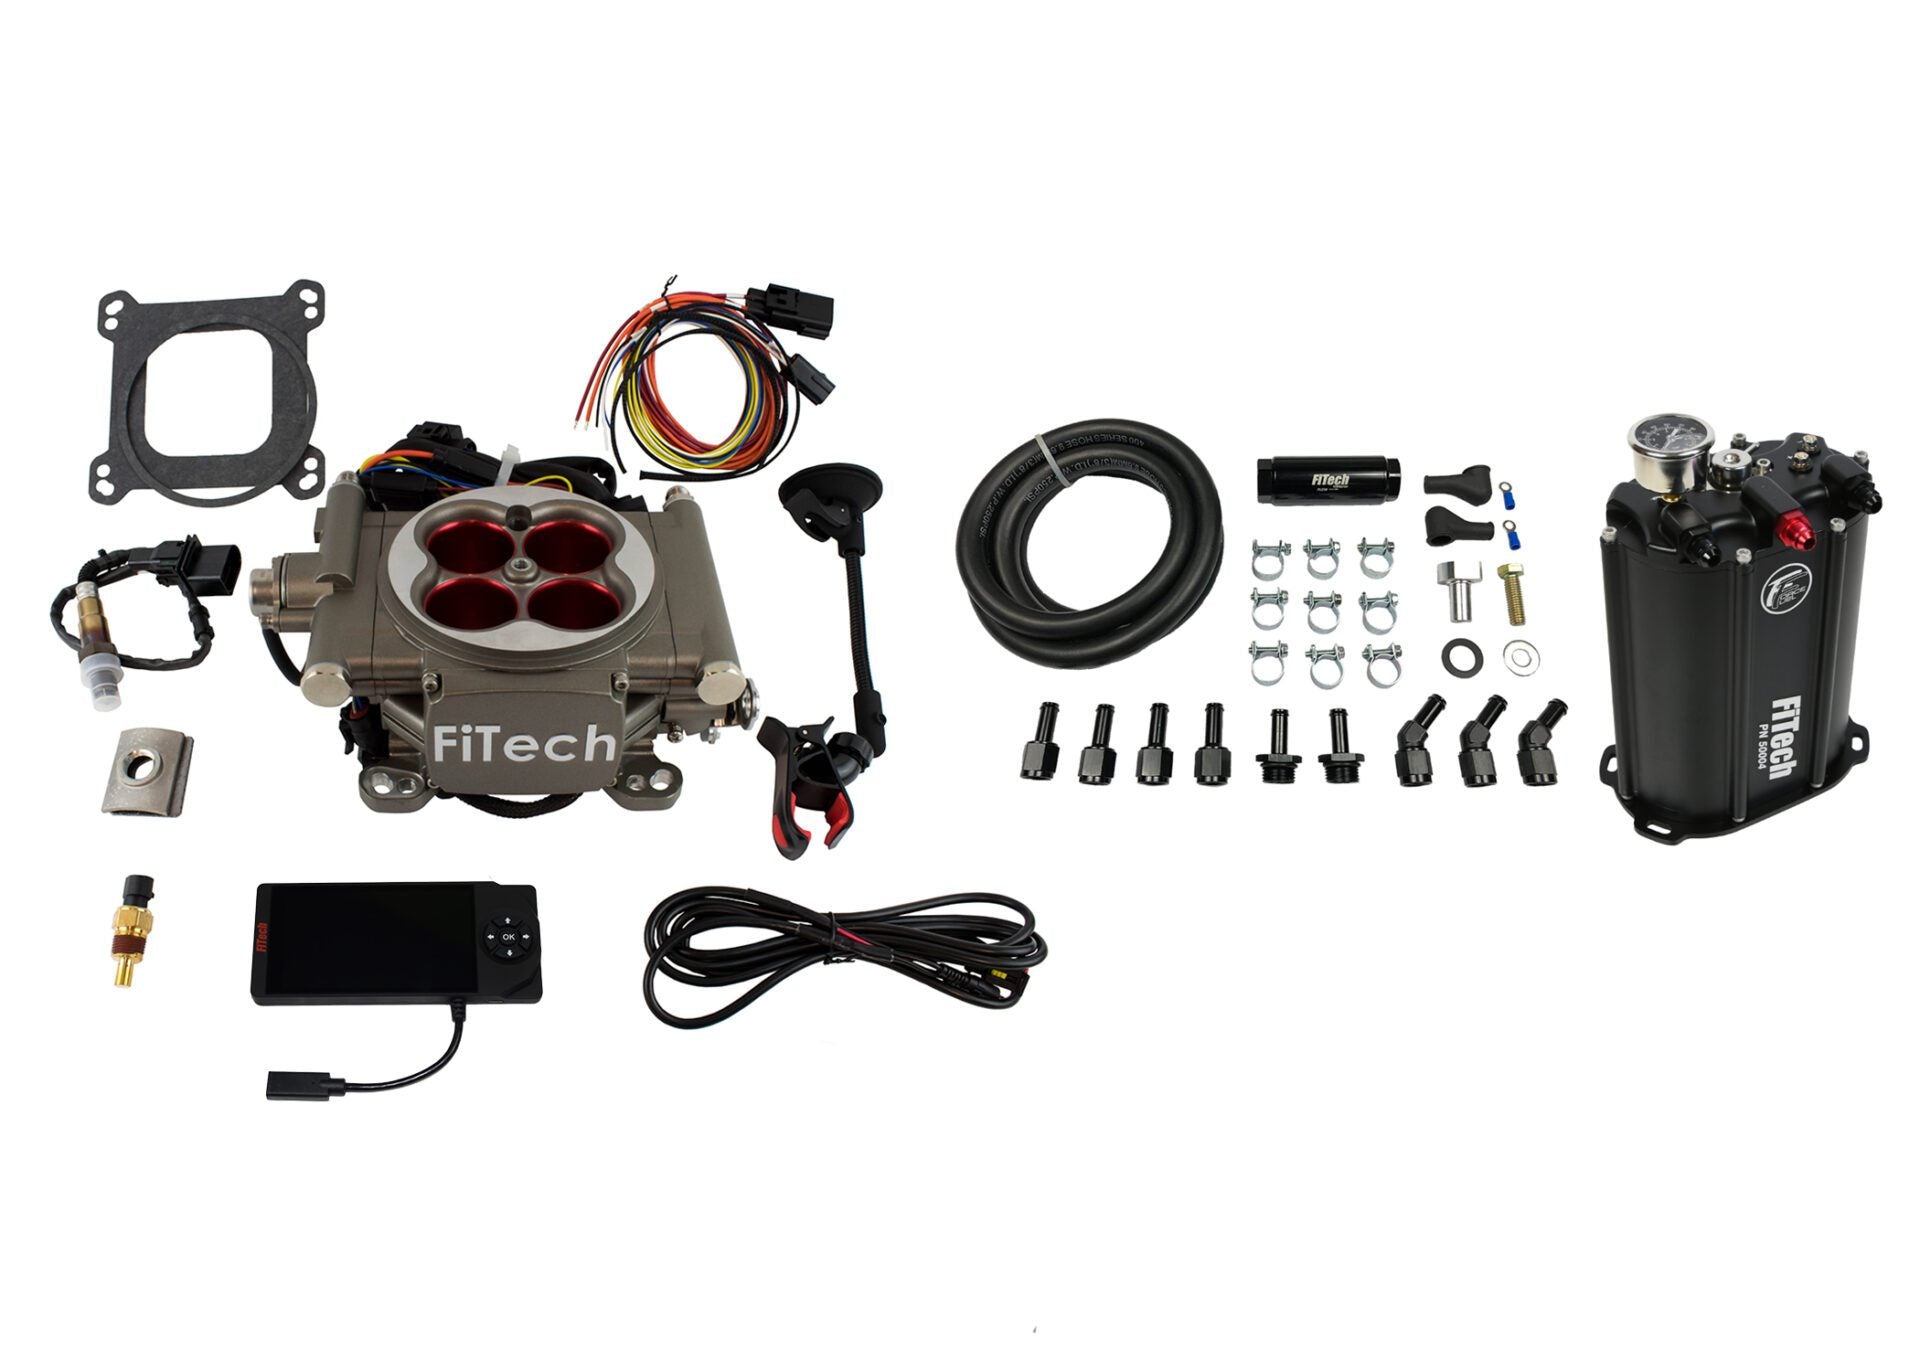 FiTech 35203 Go Street EFI System Master Kit w/ Force Fuel, Fuel Delivery System